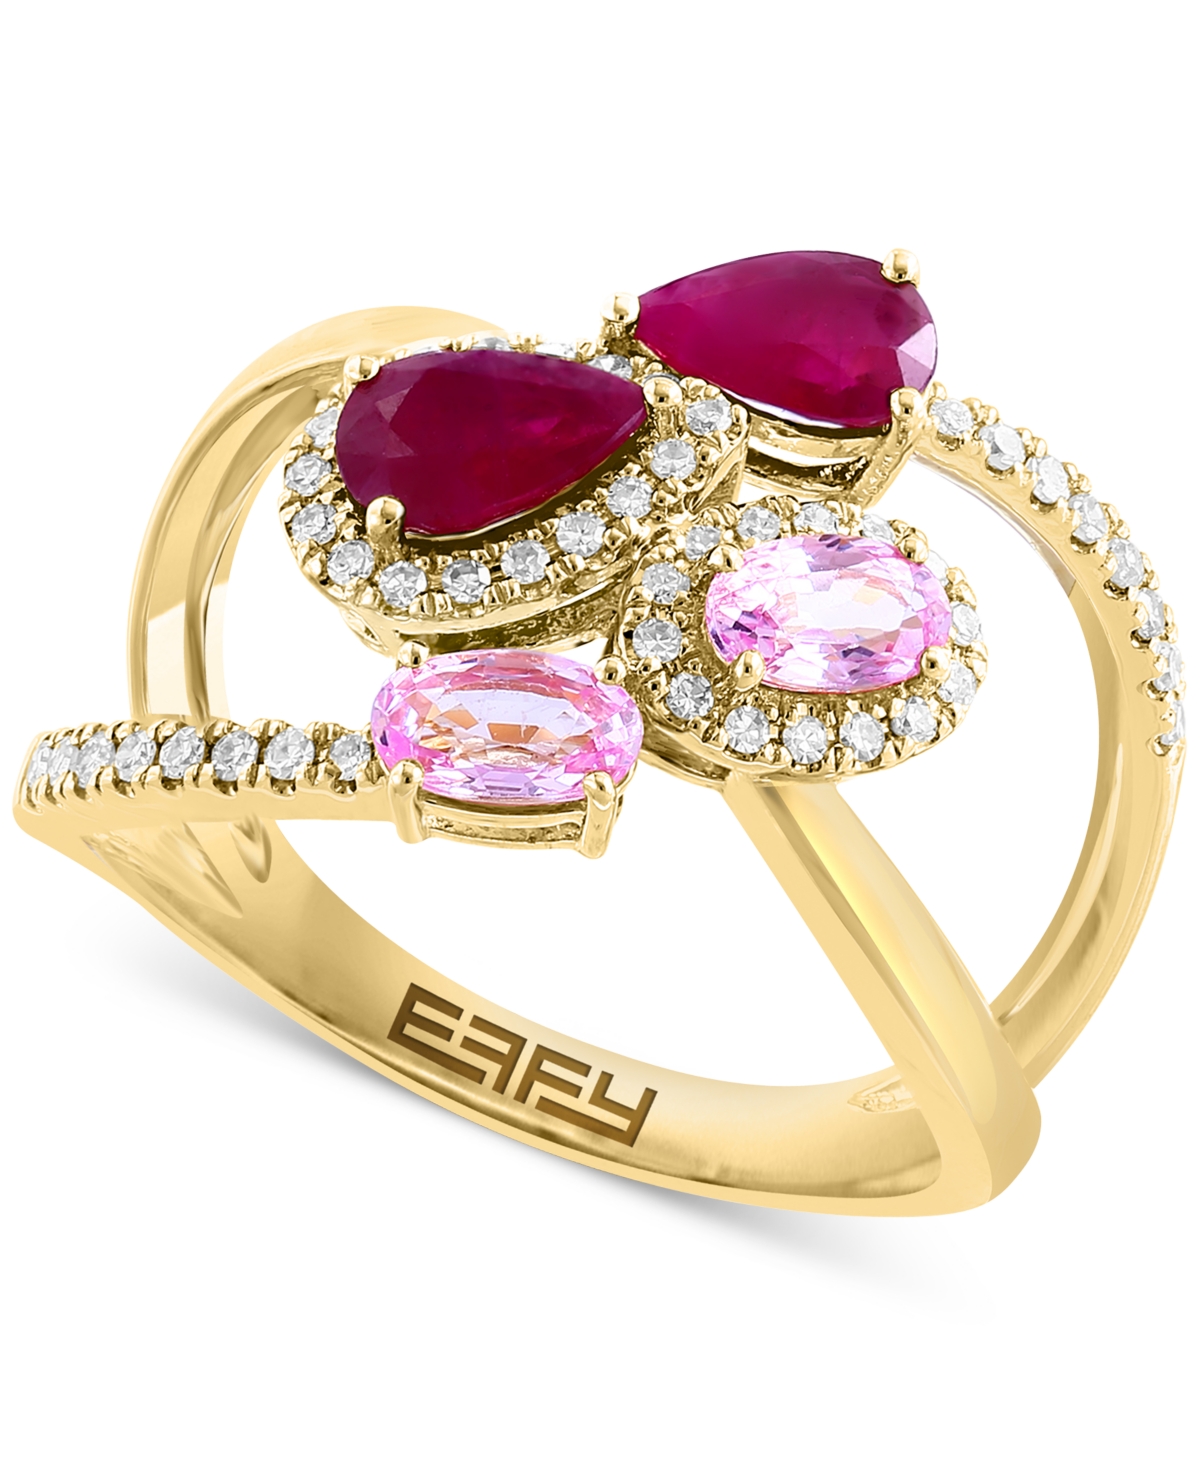 Effy Pink Sapphire (1/2 ct. t.w.), Ruby (7/8 ct. t.w.), & Diamond (1/4 ct. t.w.) Crossover Statement Ring in 14k Gold - Yellow Gold